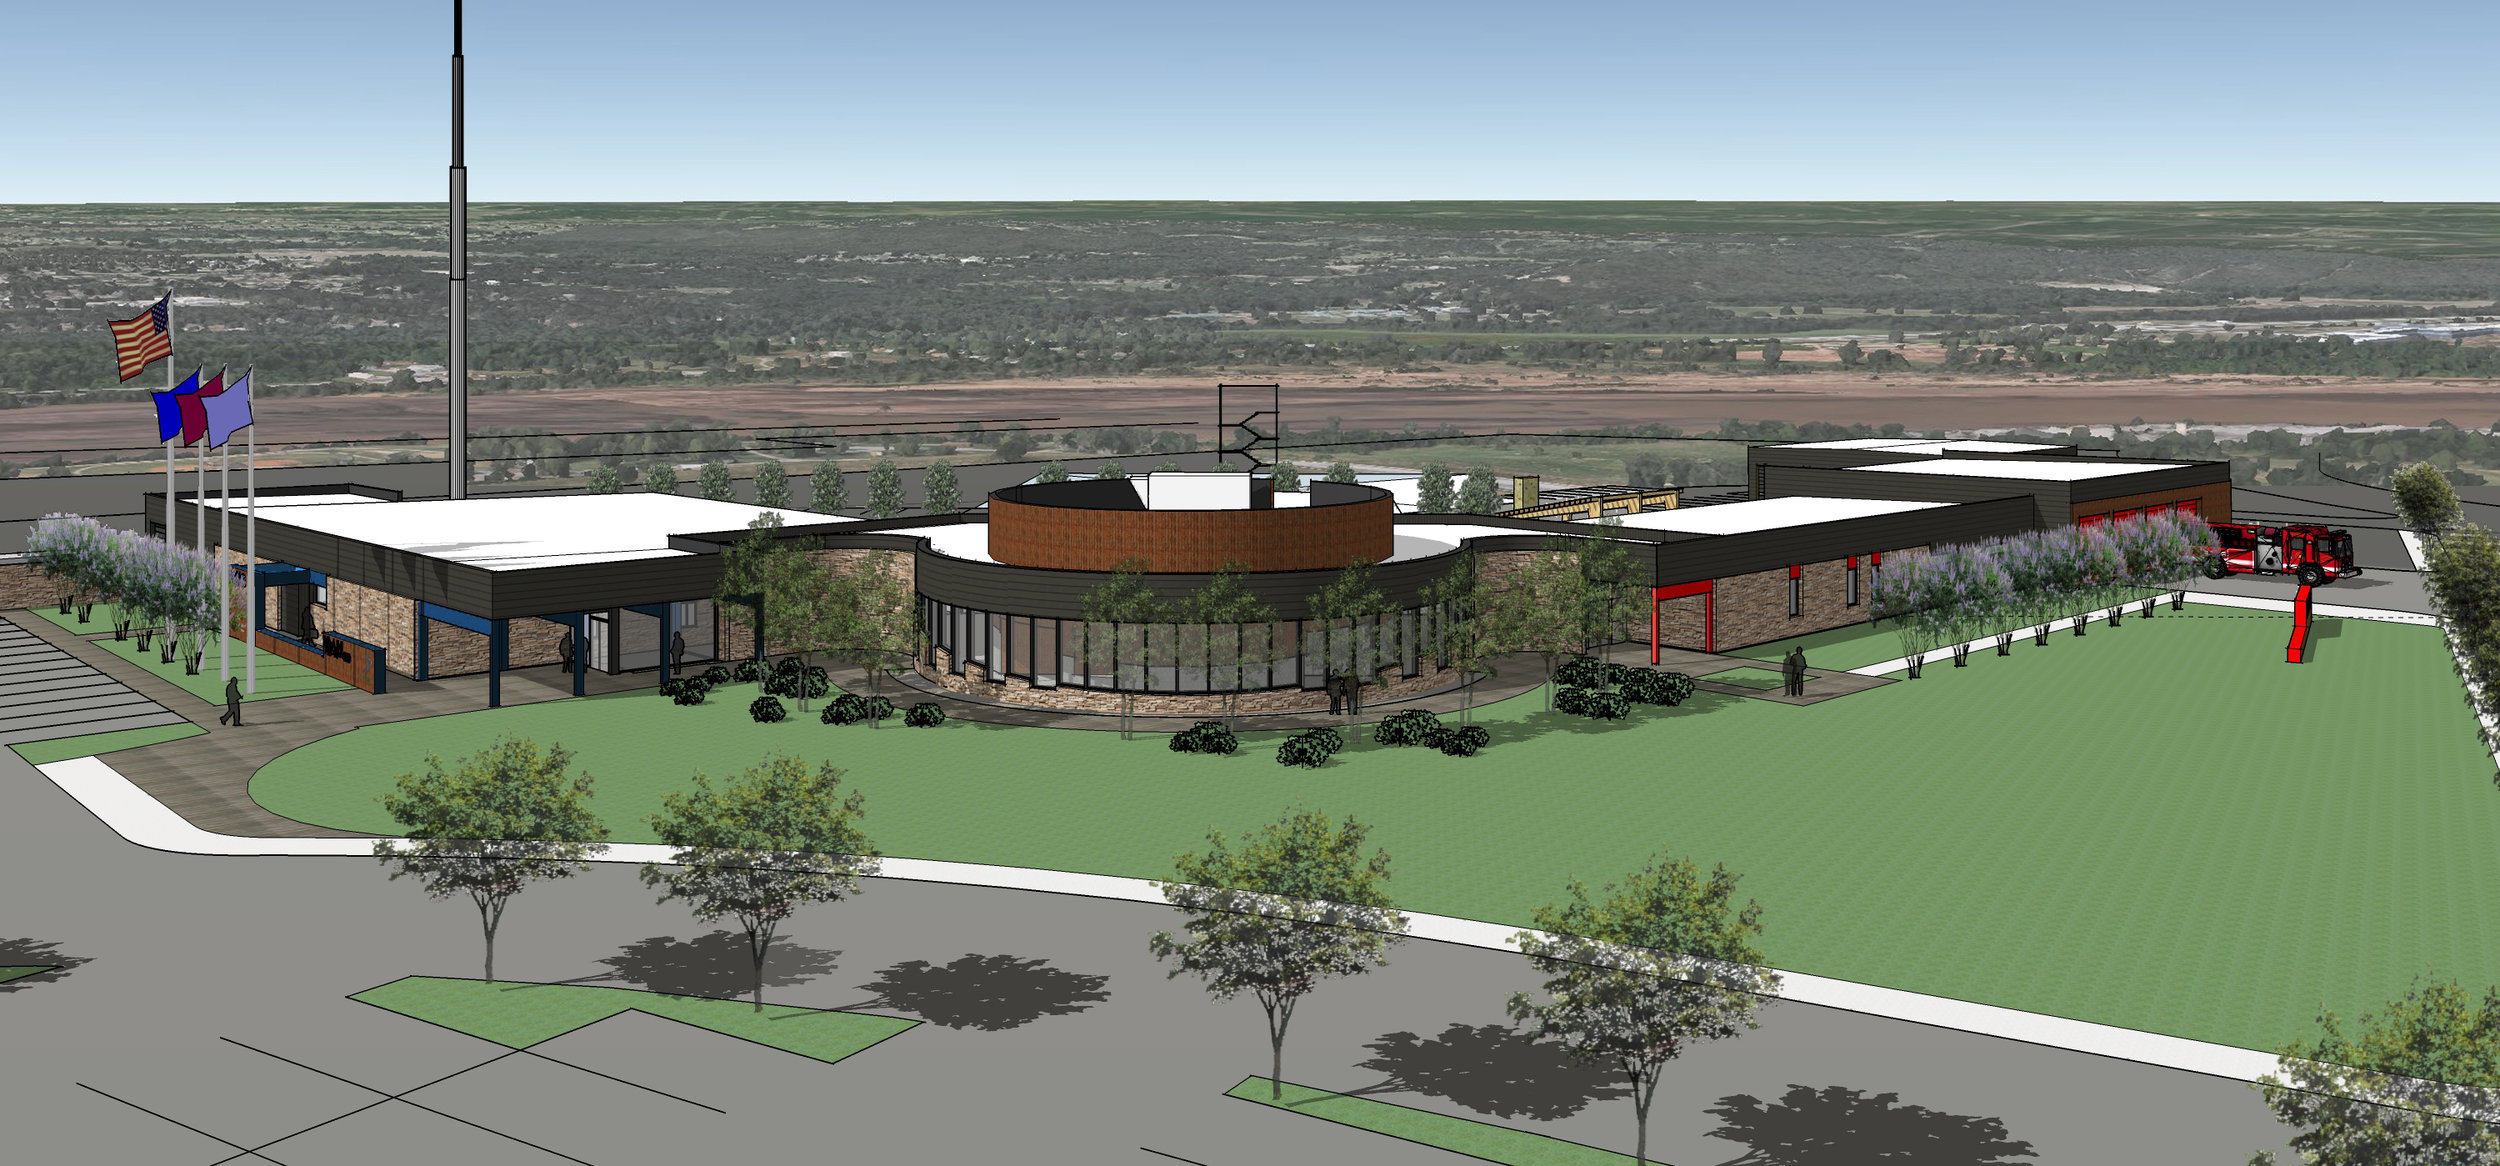  Conceptual rendering of Bilile A. Hall Public Safety Center by Dewberry Architects. 